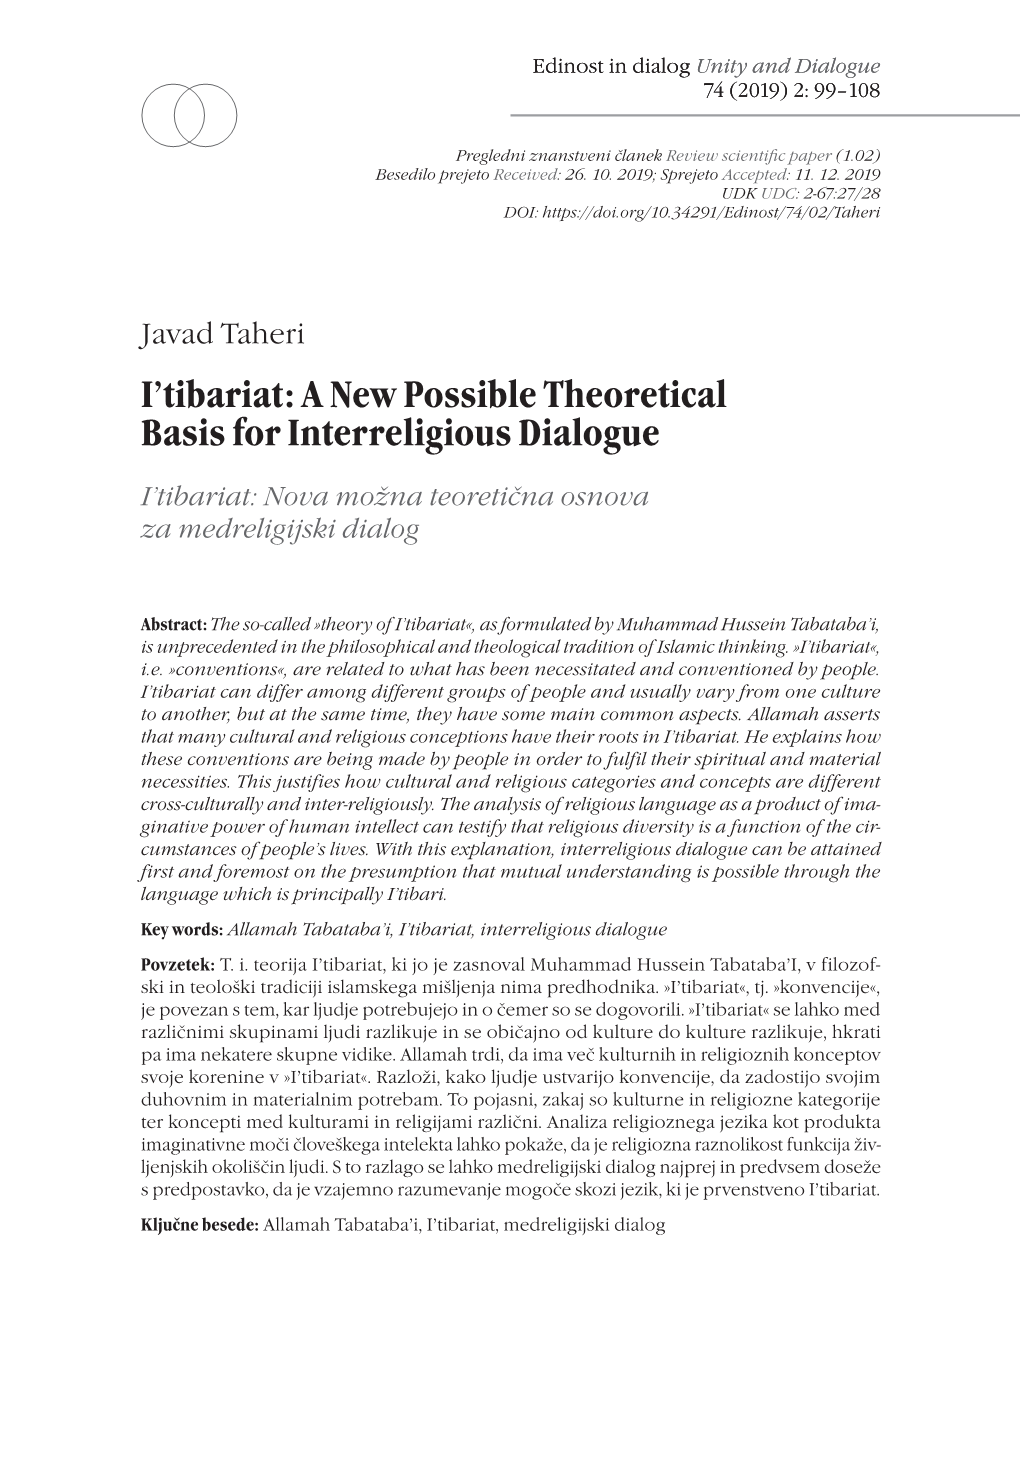 I'tibariat: a New Possible Theoretical Basis for Interreligious Dialogue